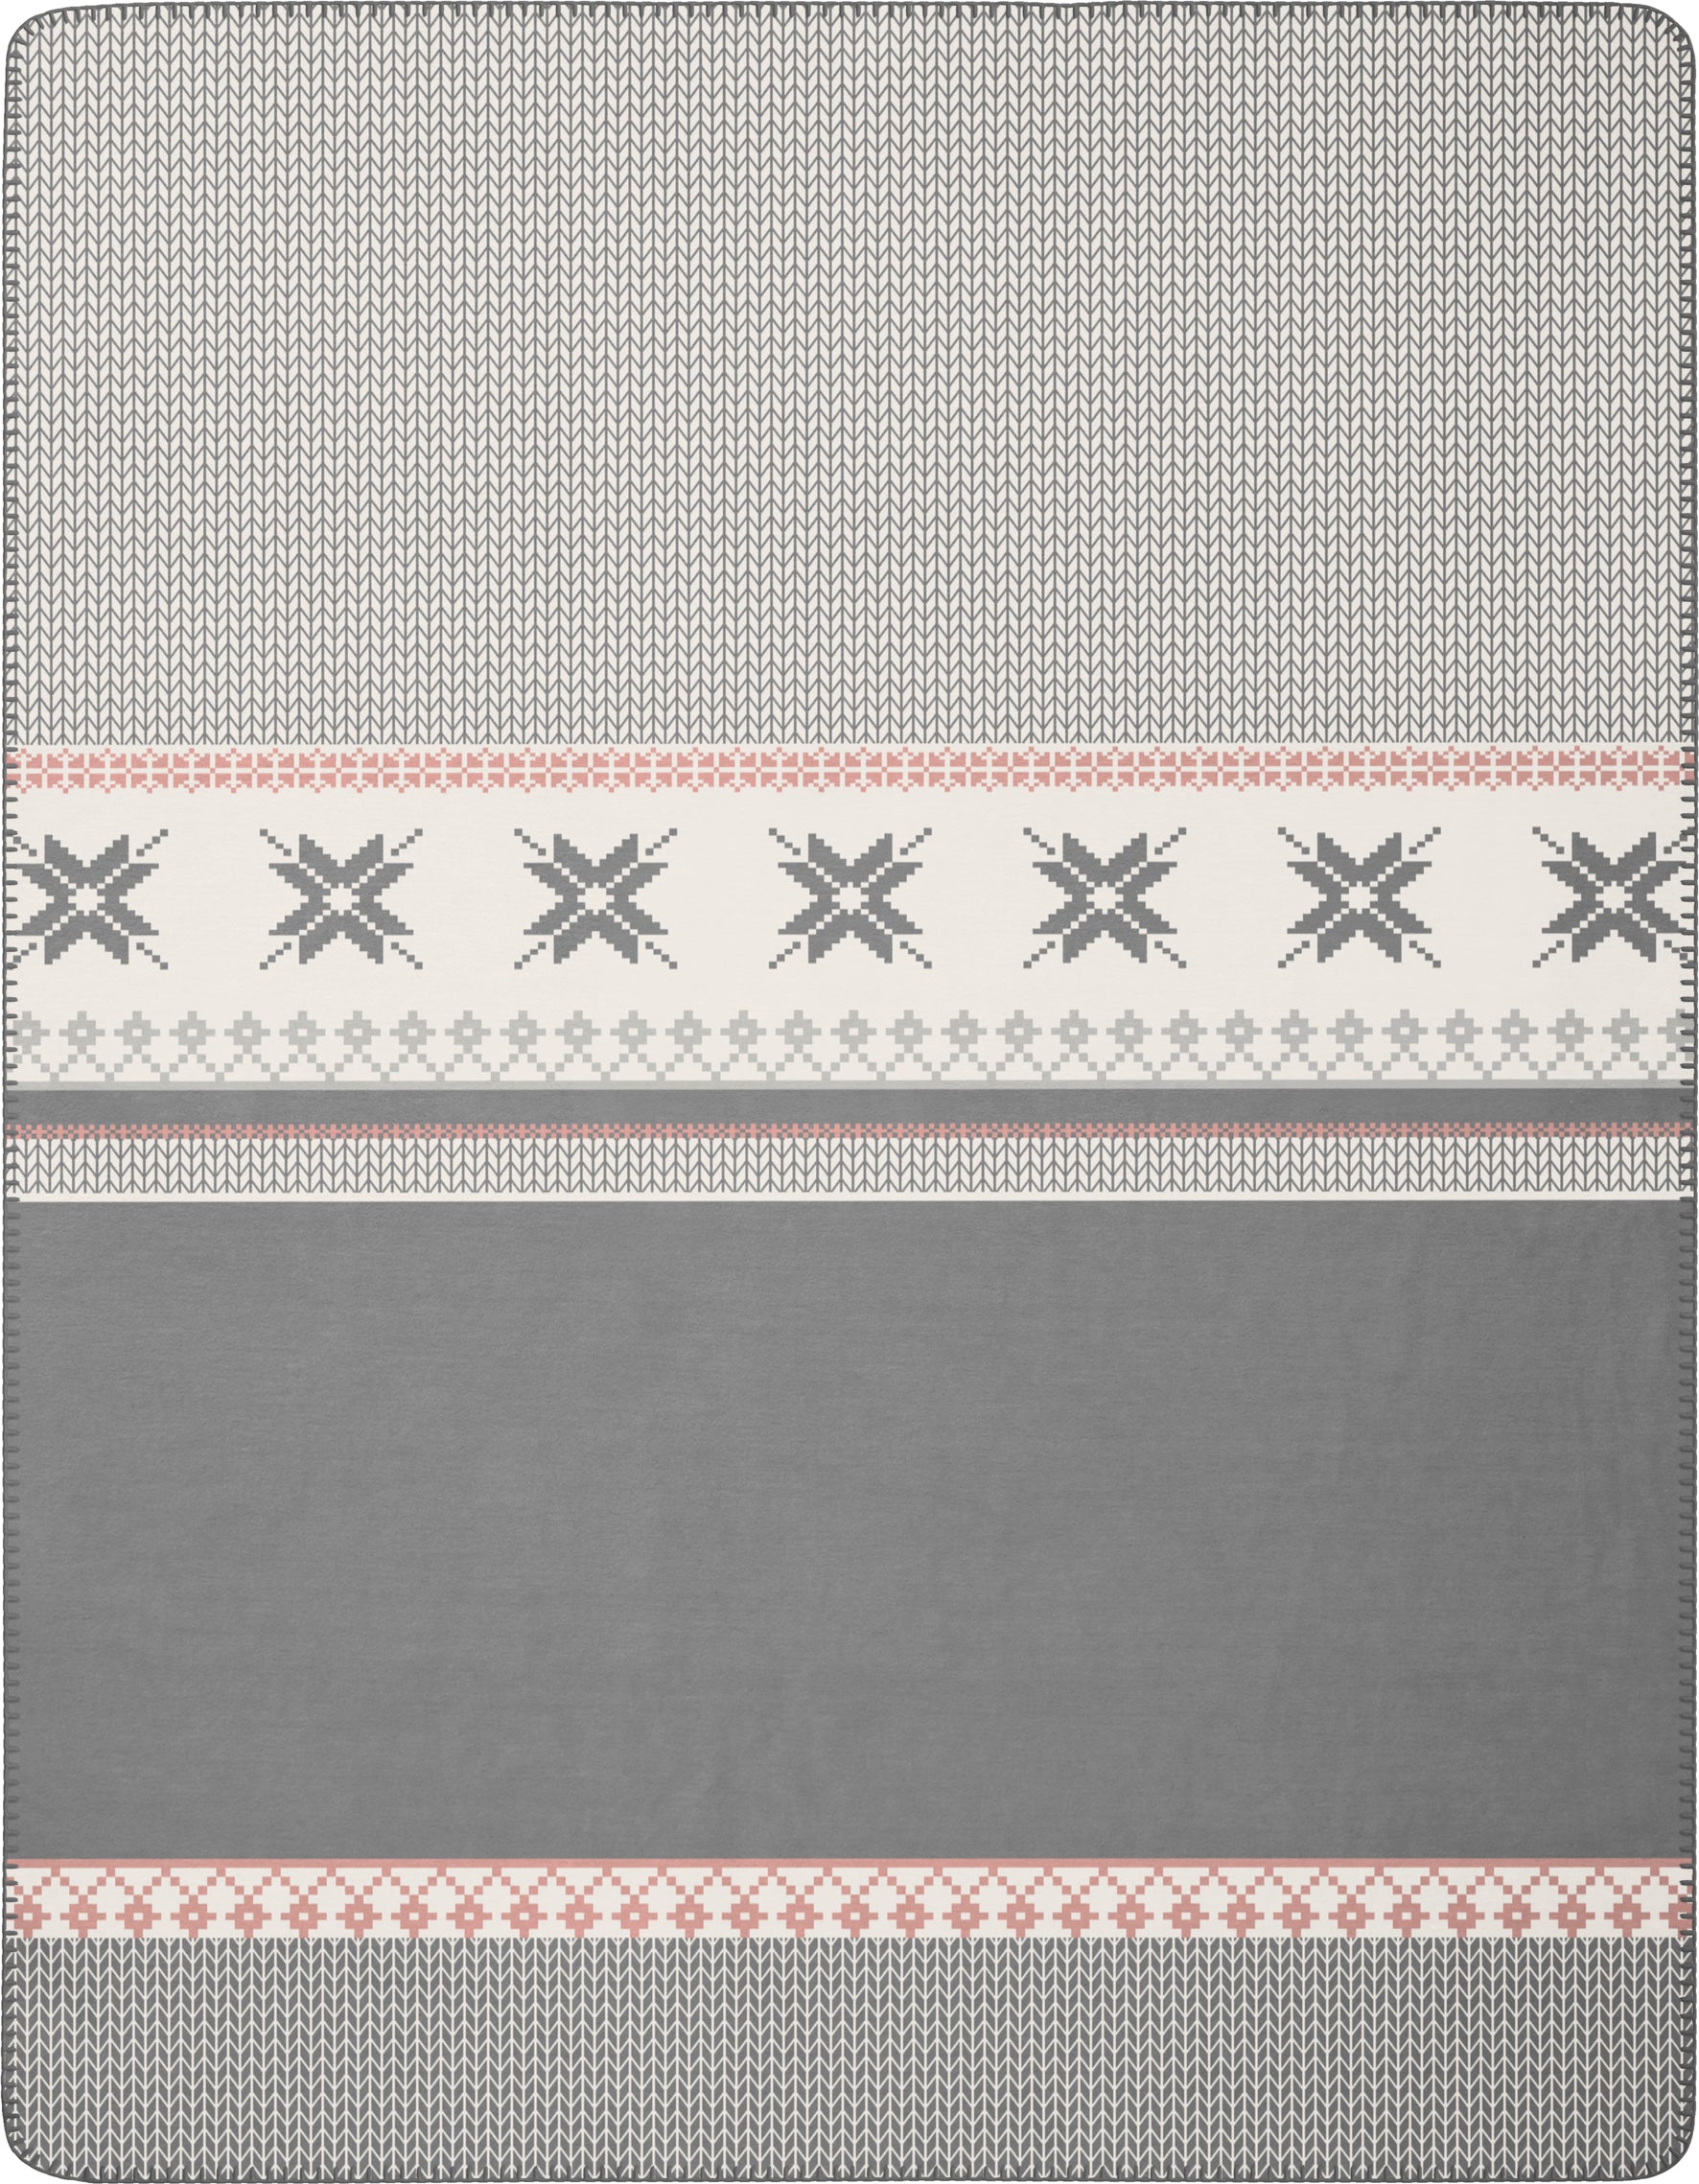 Winterly Blanket. White, grey and red geometric and floral pattern.